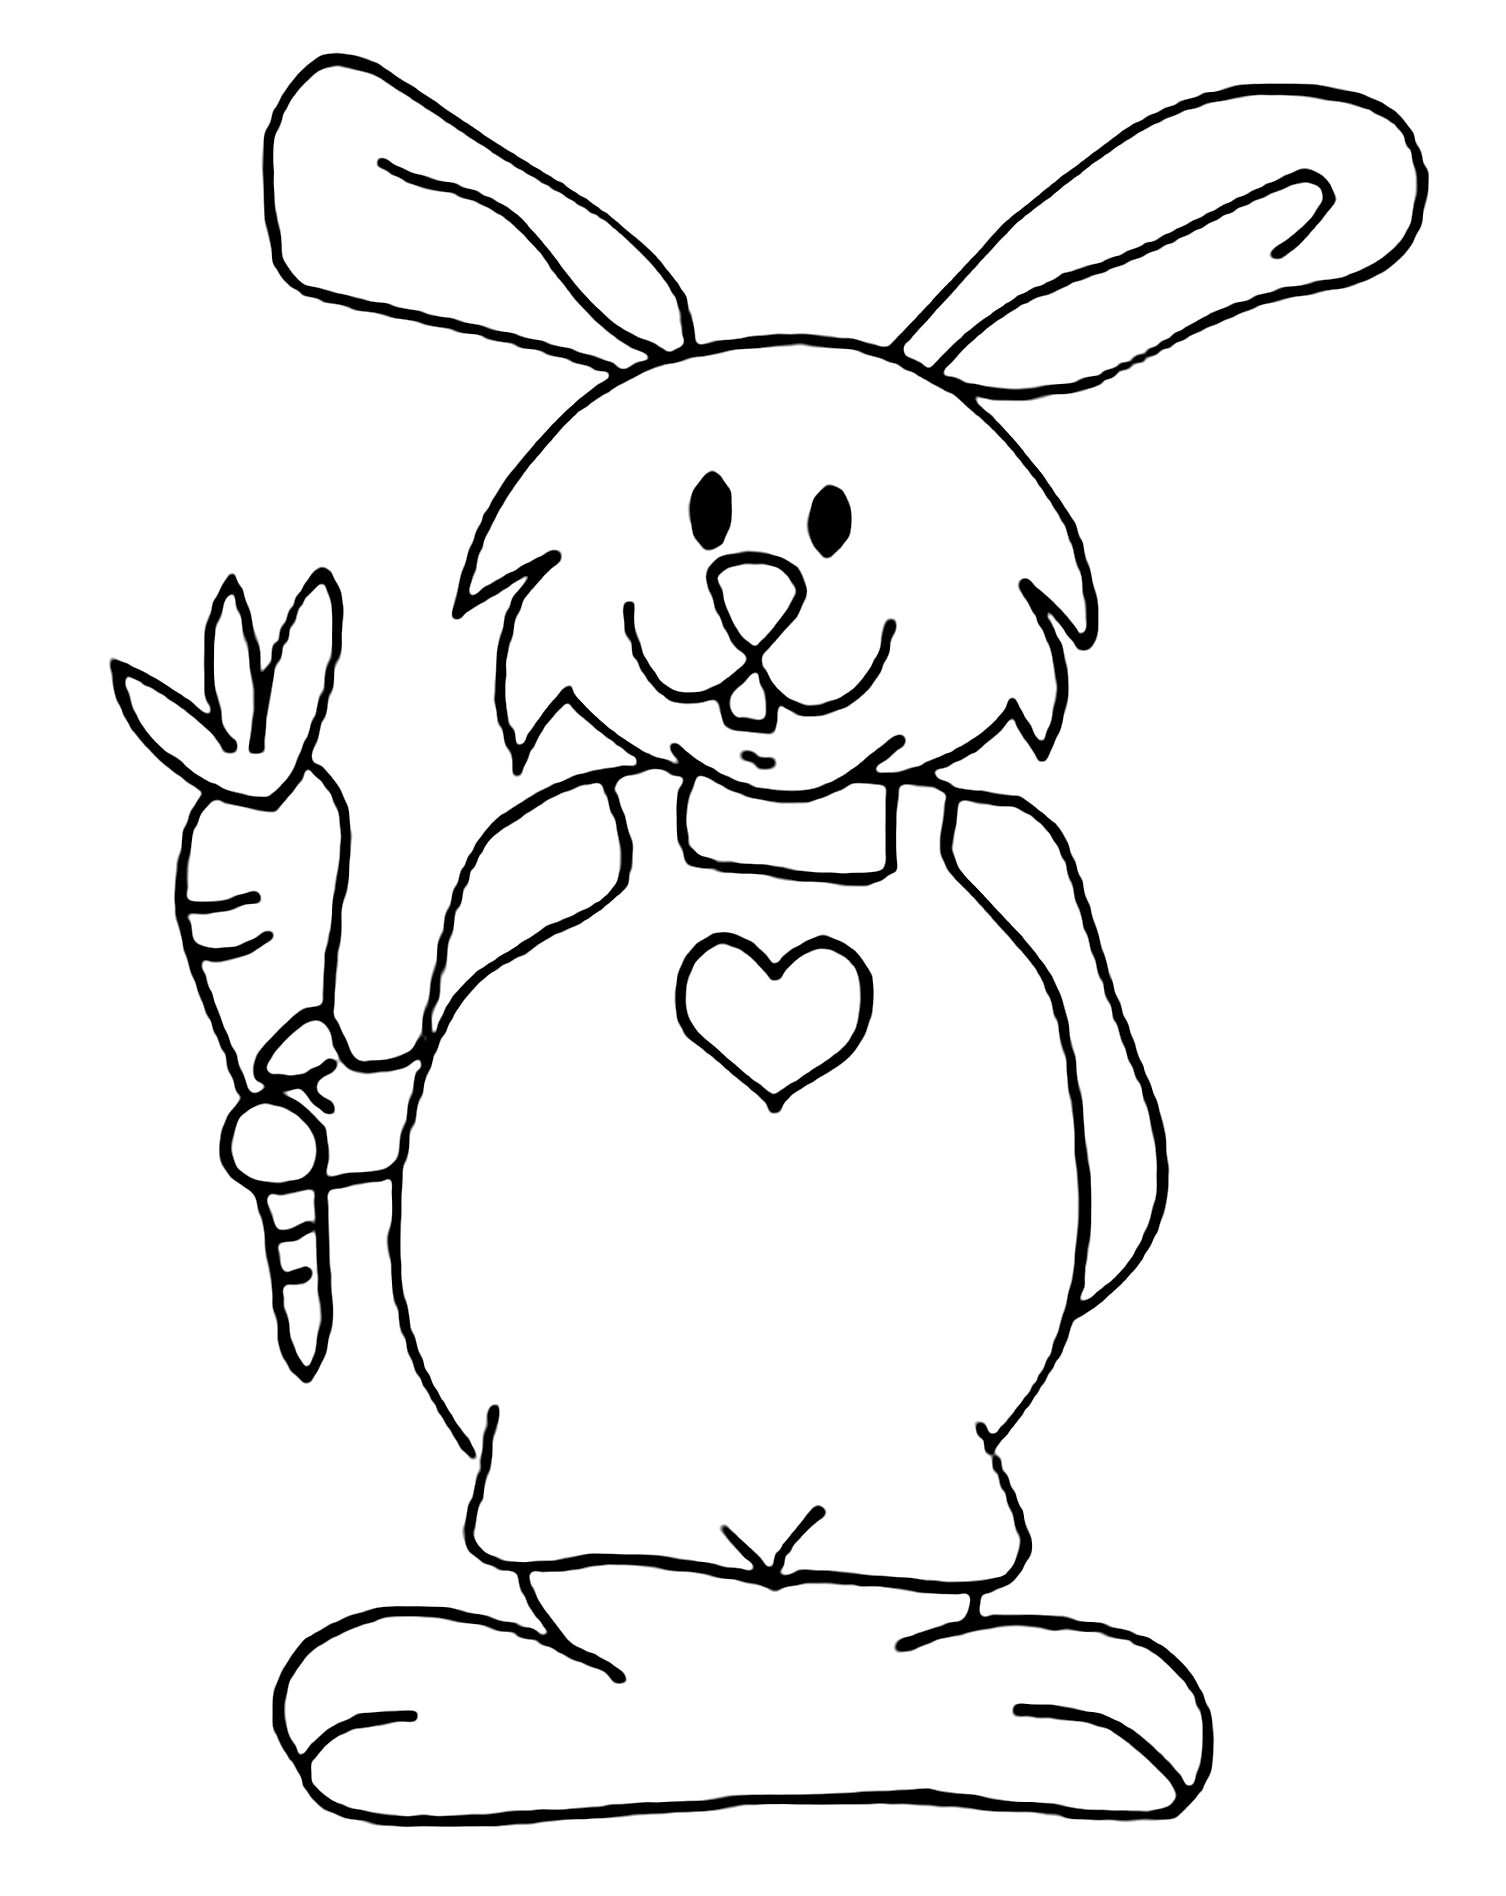 Free Rabbit Coloring Pages To Print - Rabbits &Amp; Bunnies Kids Coloring Pages